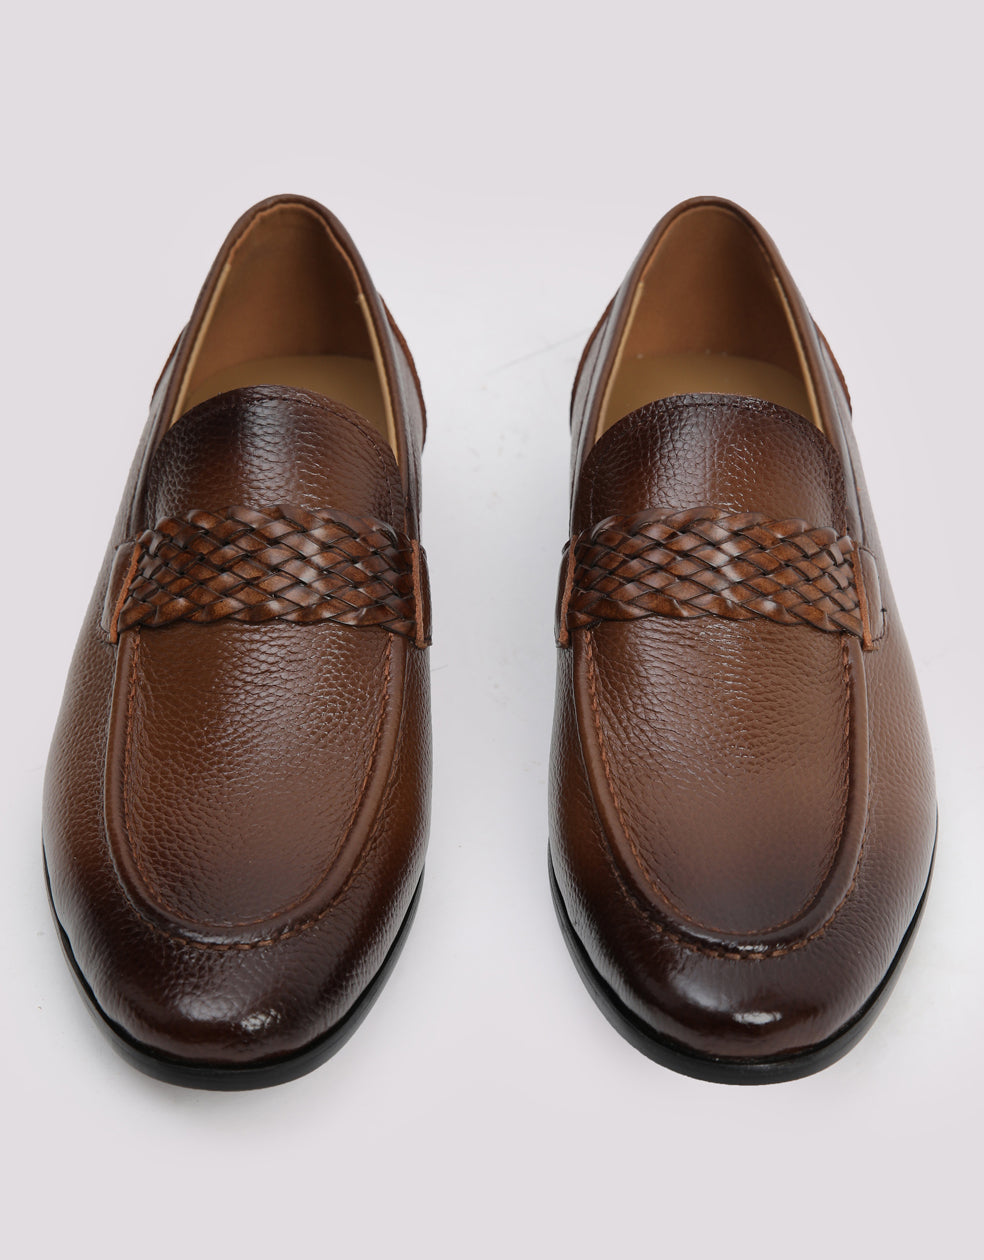 COFFEE MILT TEXTURED SHOES